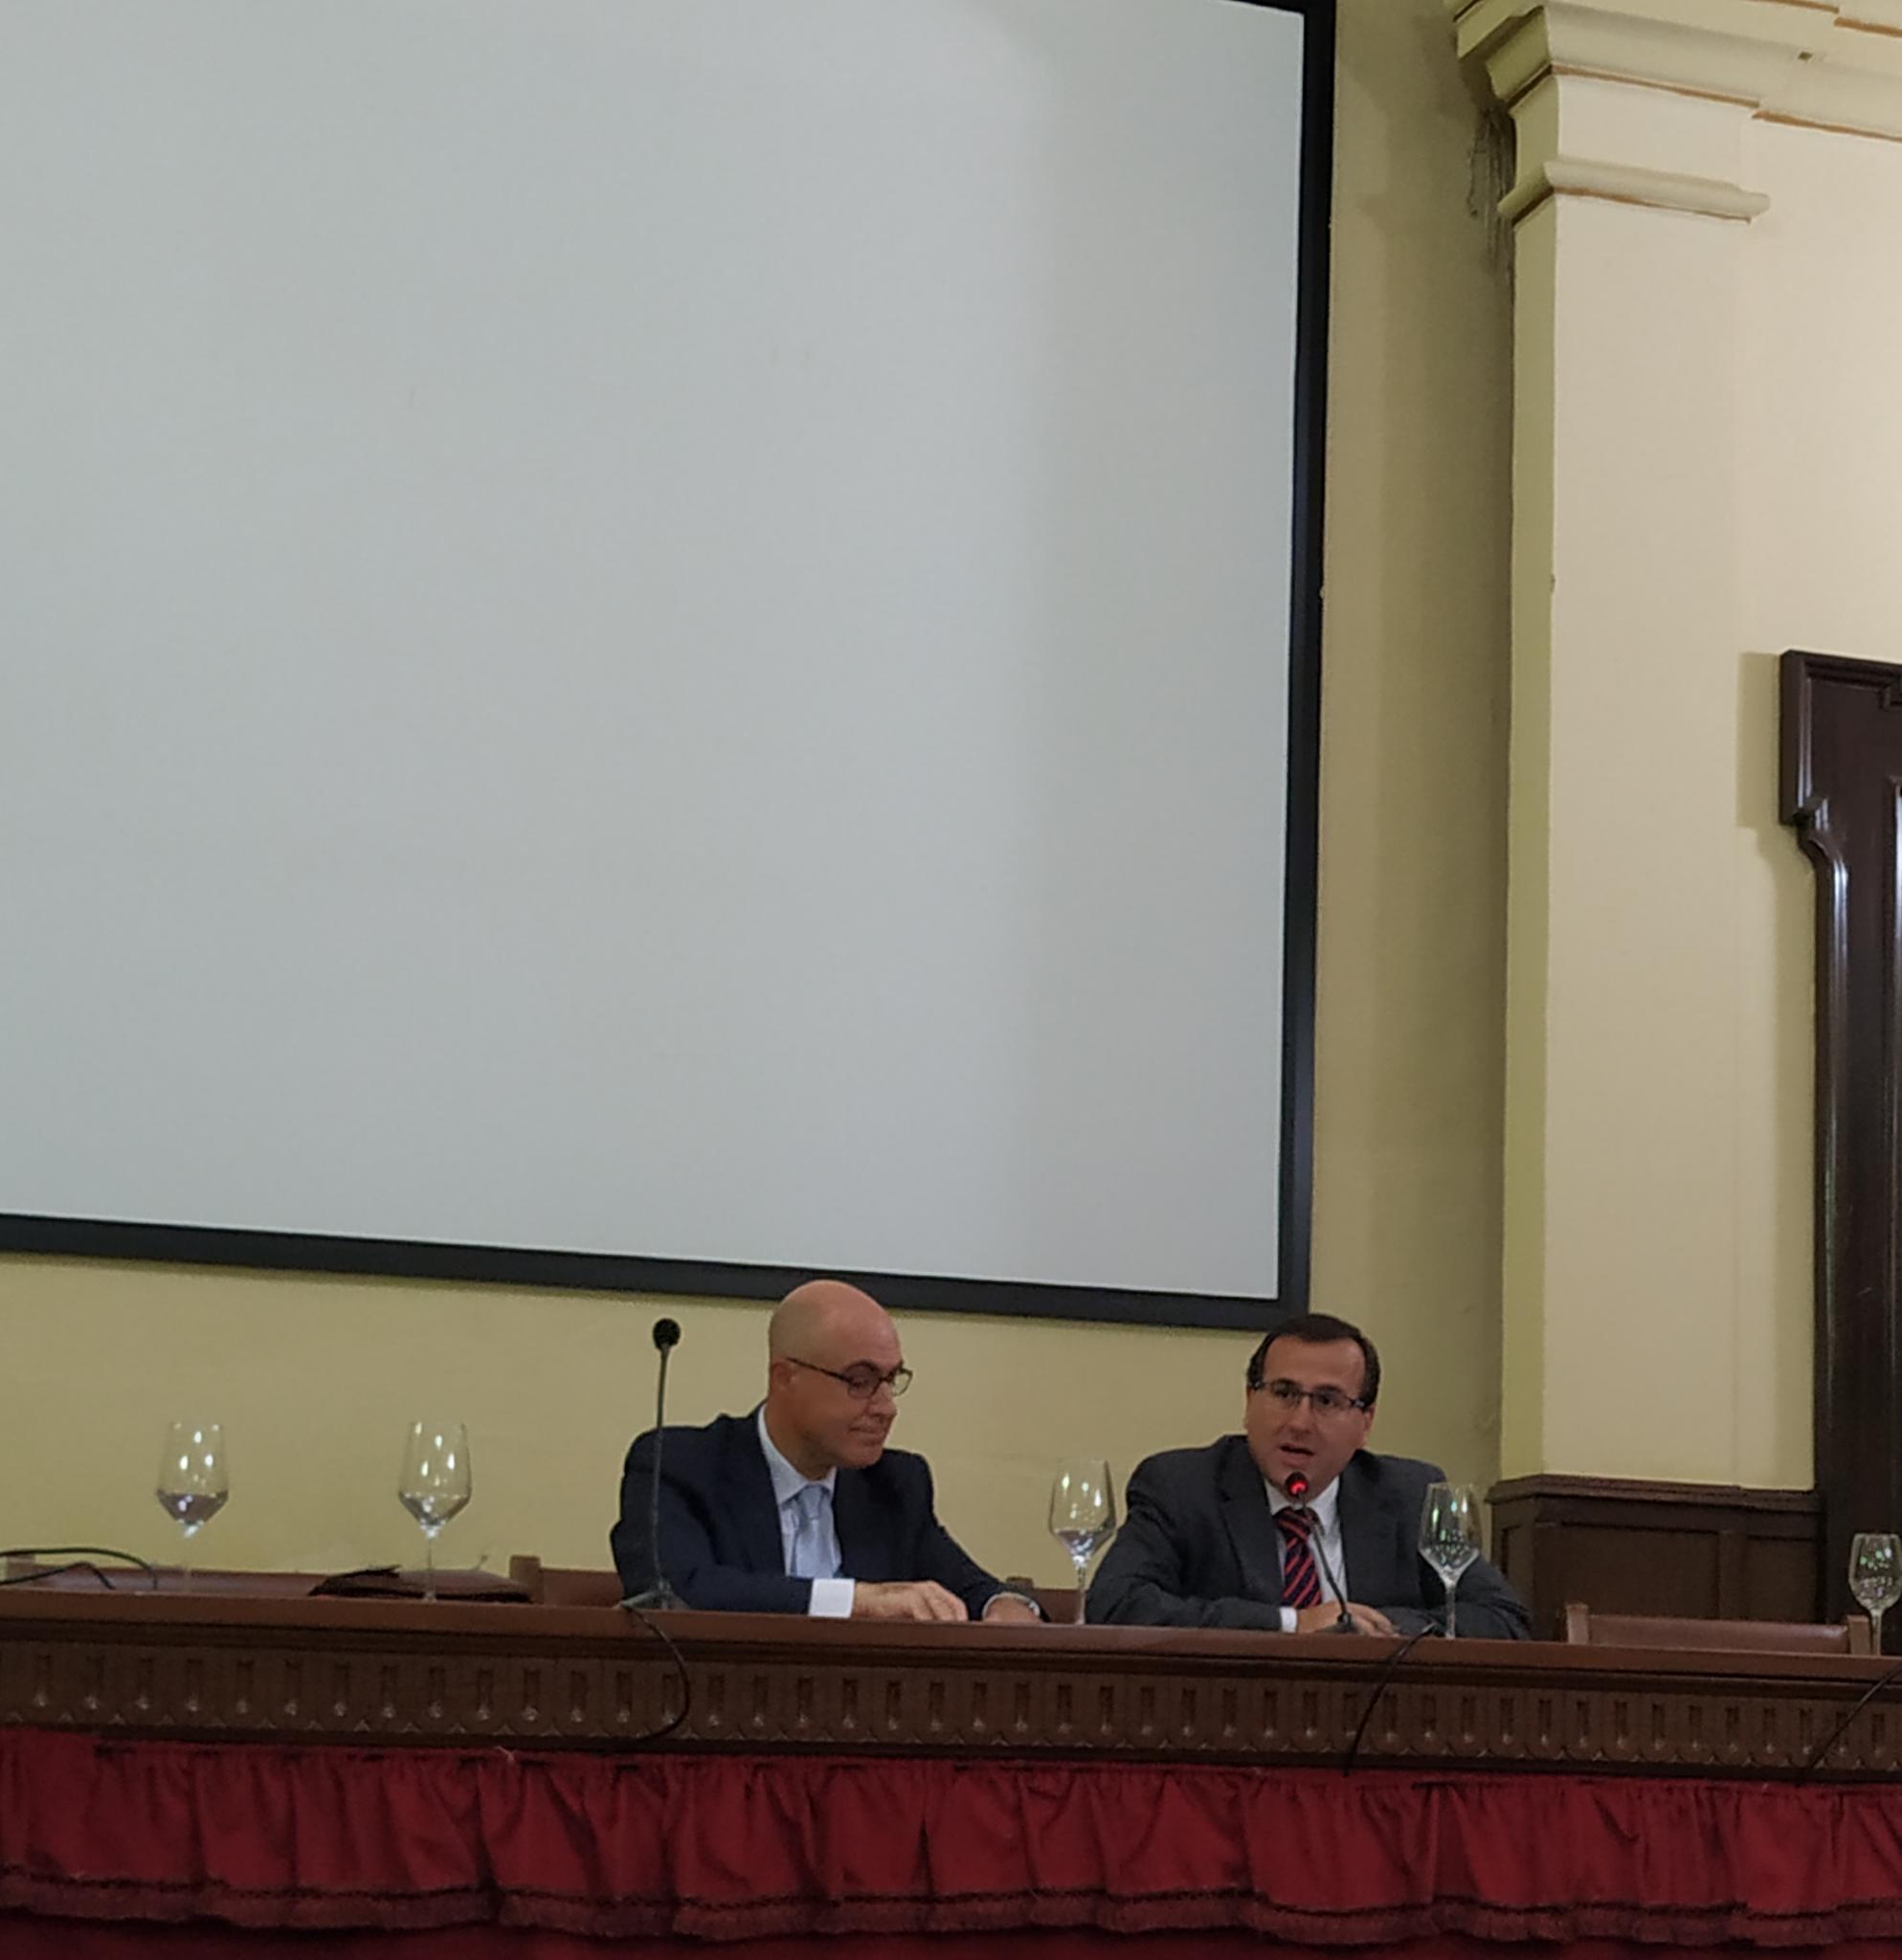 Image in which two people can be seen making the institutional presentation of the course